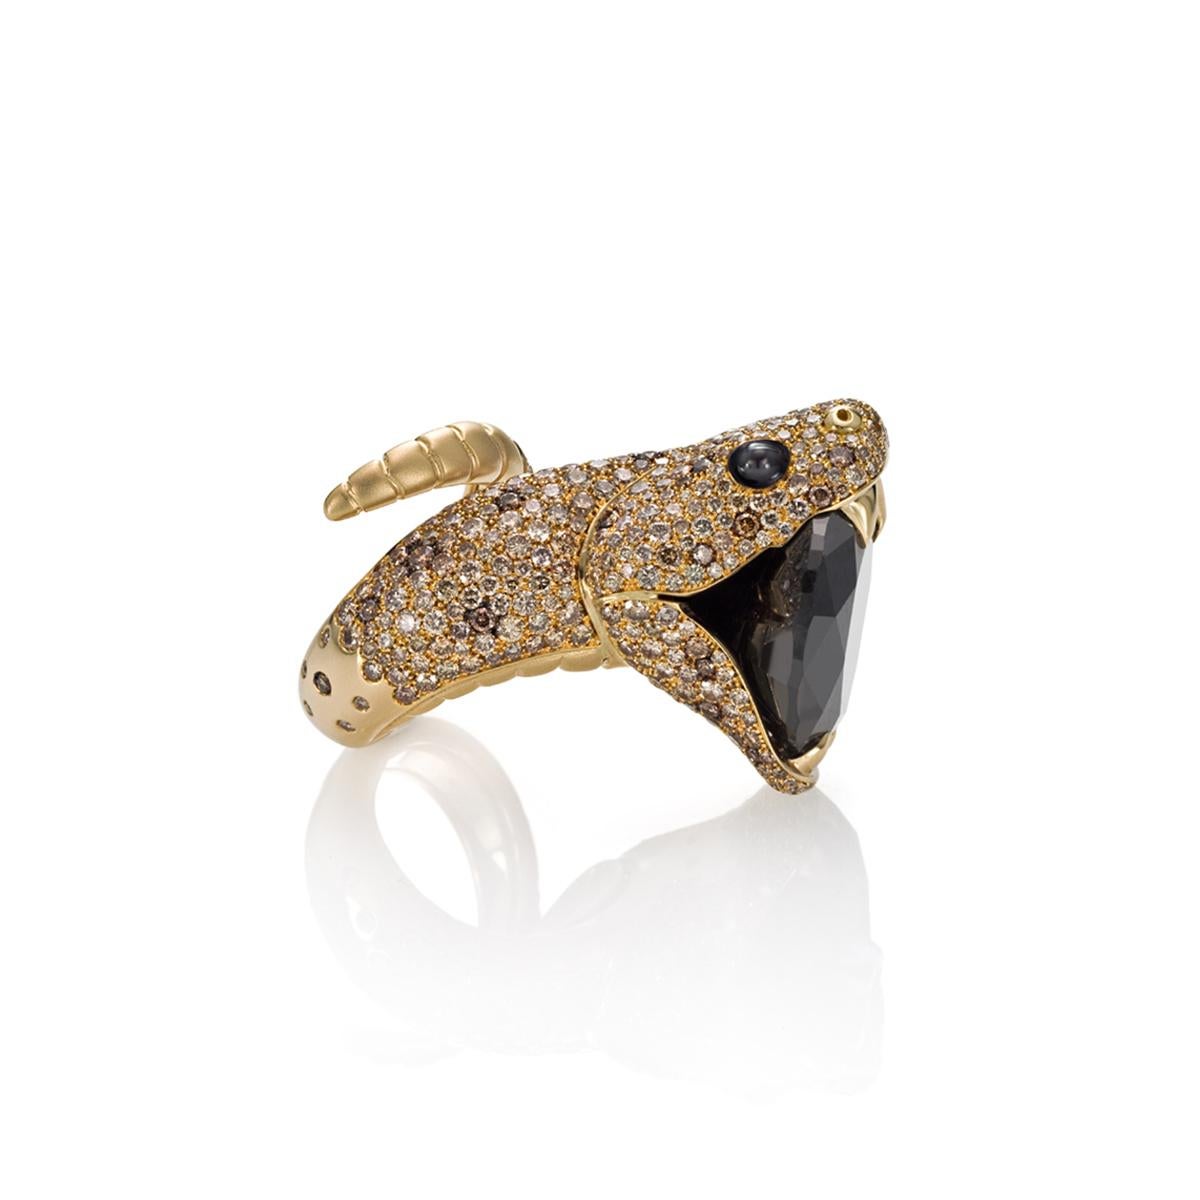 This bold fashion ring is made for people with a strong personality. Beautifully crafted in 18 Kt yellow gold, this wrap ring is shaped in a diamond-pavé snake clenching a sizable black diamond between its teeth. The whole surface of the head of the